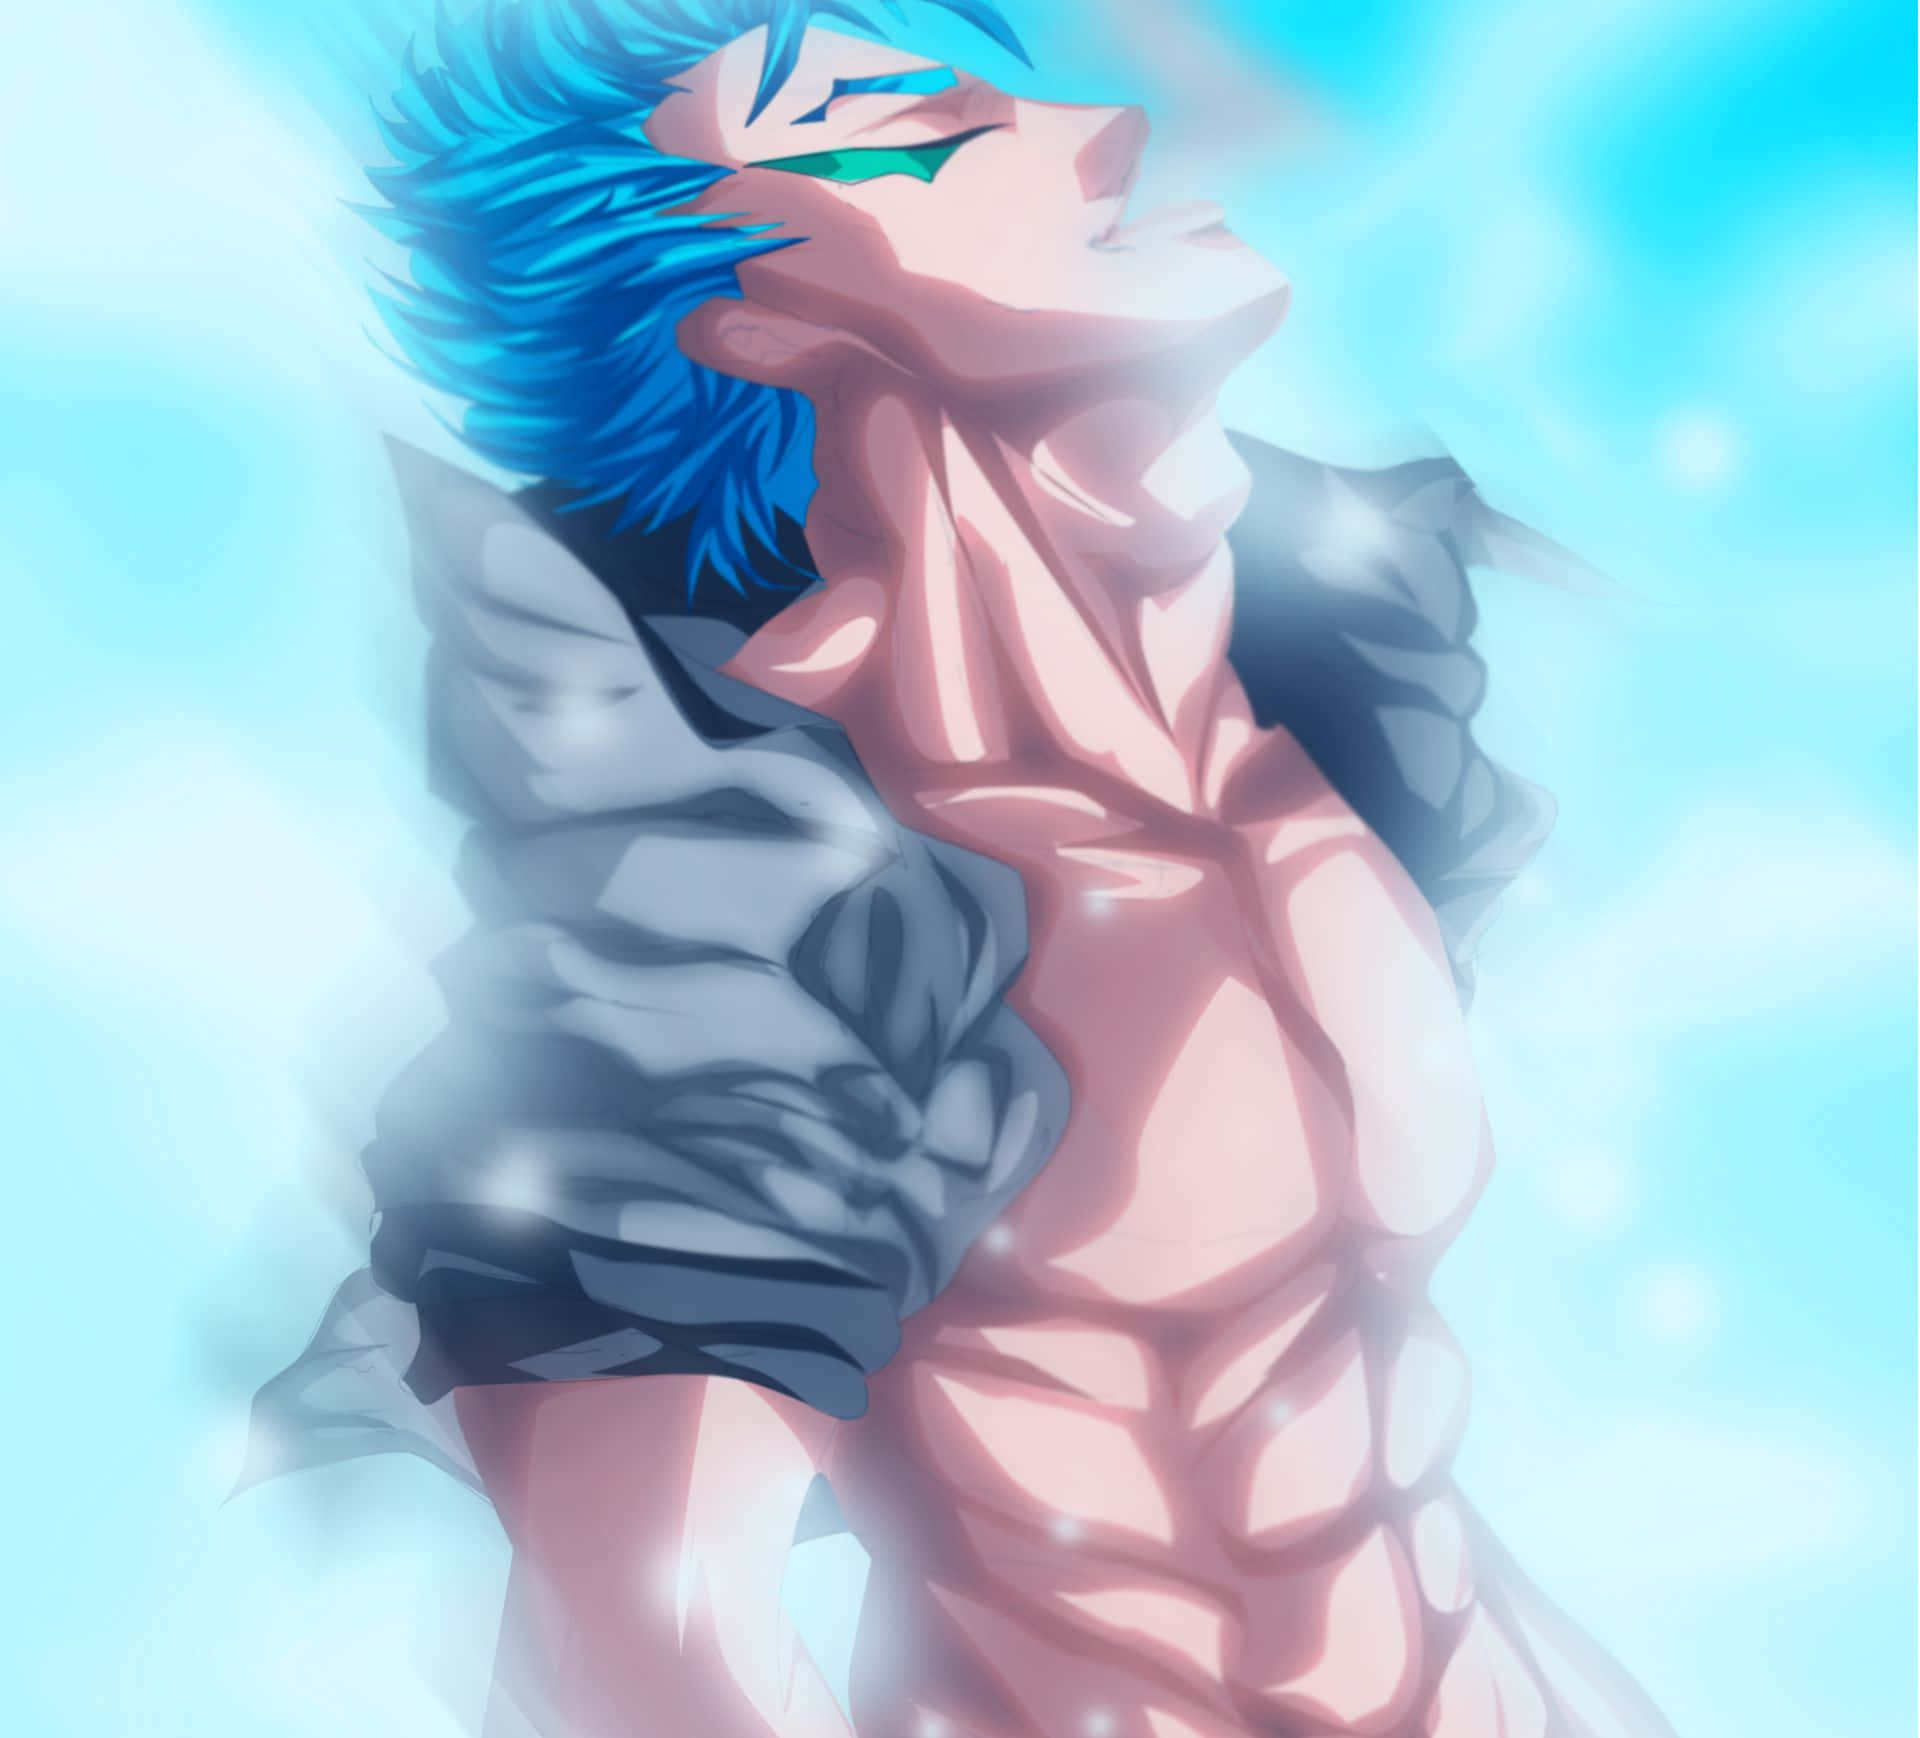 Grimmjow Jaegerjaquez, the well-known Bleach character Wallpaper